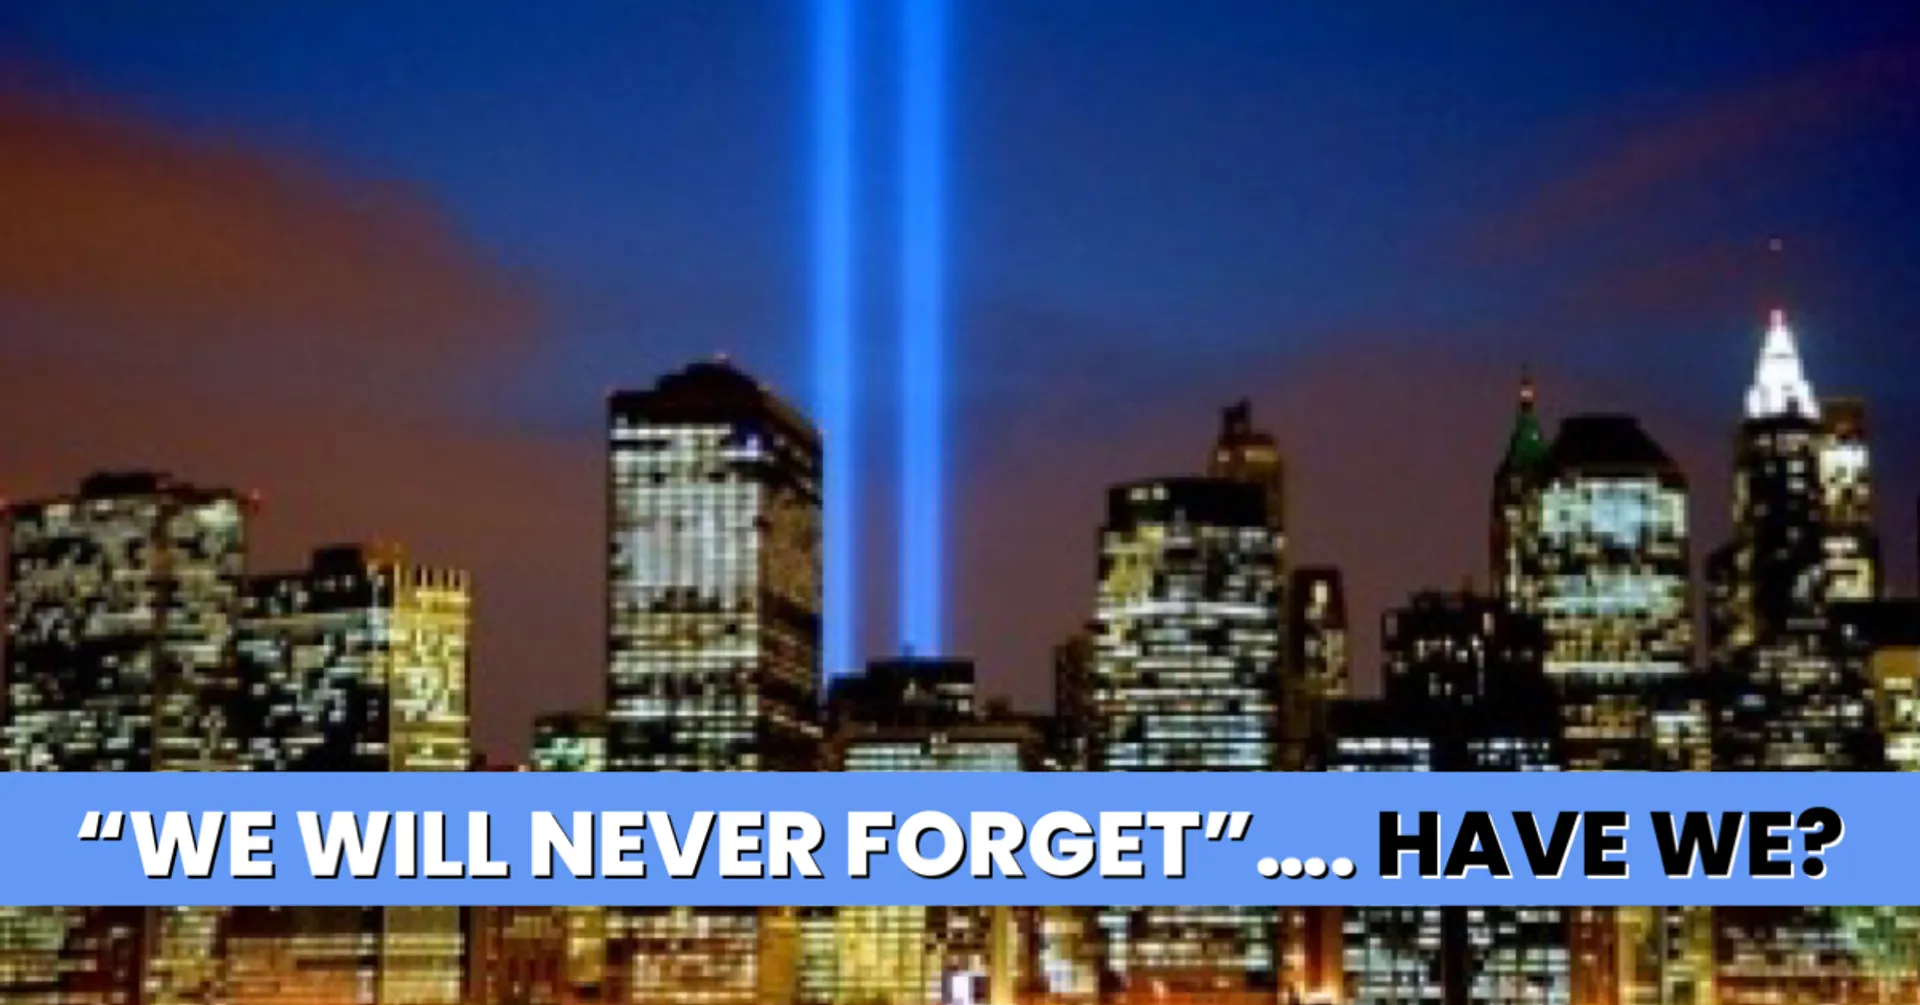 “WE WILL NEVER FORGET …HAVE WE?” - from Joey’s Blog @ NCTECHMEDIC.com

Hello. Joey here. On this day my thoughts and prayers are with you and your families.  

"We will never forget" 

These words echo in our hearts every September 11th as we remember the tragic events that unfolded in 2001. 

But as we commemorate this day, it's essential to ask ourselves: Have we truly remembered? 

In the aftermath of 9/11, our nation was united in grief and resolve. On September 12th, 2001, something amazing happened. 

We were not Democrats or Republicans, black or white, liberal or conservative. 

We were Americans, bound together by a shared sense of tragedy and a common purpose: to heal, rebuild, and help one another.

People were kinder, more compassionate, and we genuinely looked out for our family, friends, and community. 

Acts of kindness were commonplace. 

We didn't see color or creed or sexual orientation or political affiliation; WE SAW FELLOW AMERICANS.

American Flags were waving everywhere you looked. 🇺🇸 

We smiled at strangers, offered support to those in need, prayed together, and uplifted each other's spirits. It was a moment of unmatched solidarity.

However, as we fast forward to the present day, it's disheartening to realize that the America we see today is almost the exact opposite of that post-9/11 unity. 

I’m sure you would agree that our nation is divided, and the divisions seem to be growing deeper with each passing day. 

• We're divided by politics, with polarization driving a wedge between us. 

• We're divided by social and cultural issues, often allowing our differences to define us rather than our shared values. 

• We're divided by echo chambers inside social media that fuel the mistrust and hostility. 

• We're divided by economic disparities, racial tensions, and an increasing lack of empathy.

It's disheartening to witness hate and division over trivial matters. 

We've lost the sense of unity and compassion that reigned on September 12th, 2001.

It doesn’t have to take another tragedy for us to return to that spirit of unity and empathy. 

We have the power to bridge these divides, to remember the lessons of 9/11, and to embrace our shared identity as Americans.

Let's challenge each other to choose kindness over hostility, understanding over prejudice, and unity over division. 

In conclusion, the memory of 9/11 should serve as a constant reminder of our potential. 

We owe it to ourselves, to our nation, and to those who lost their lives on that tragic day.

 BE GREAT!

- Joey